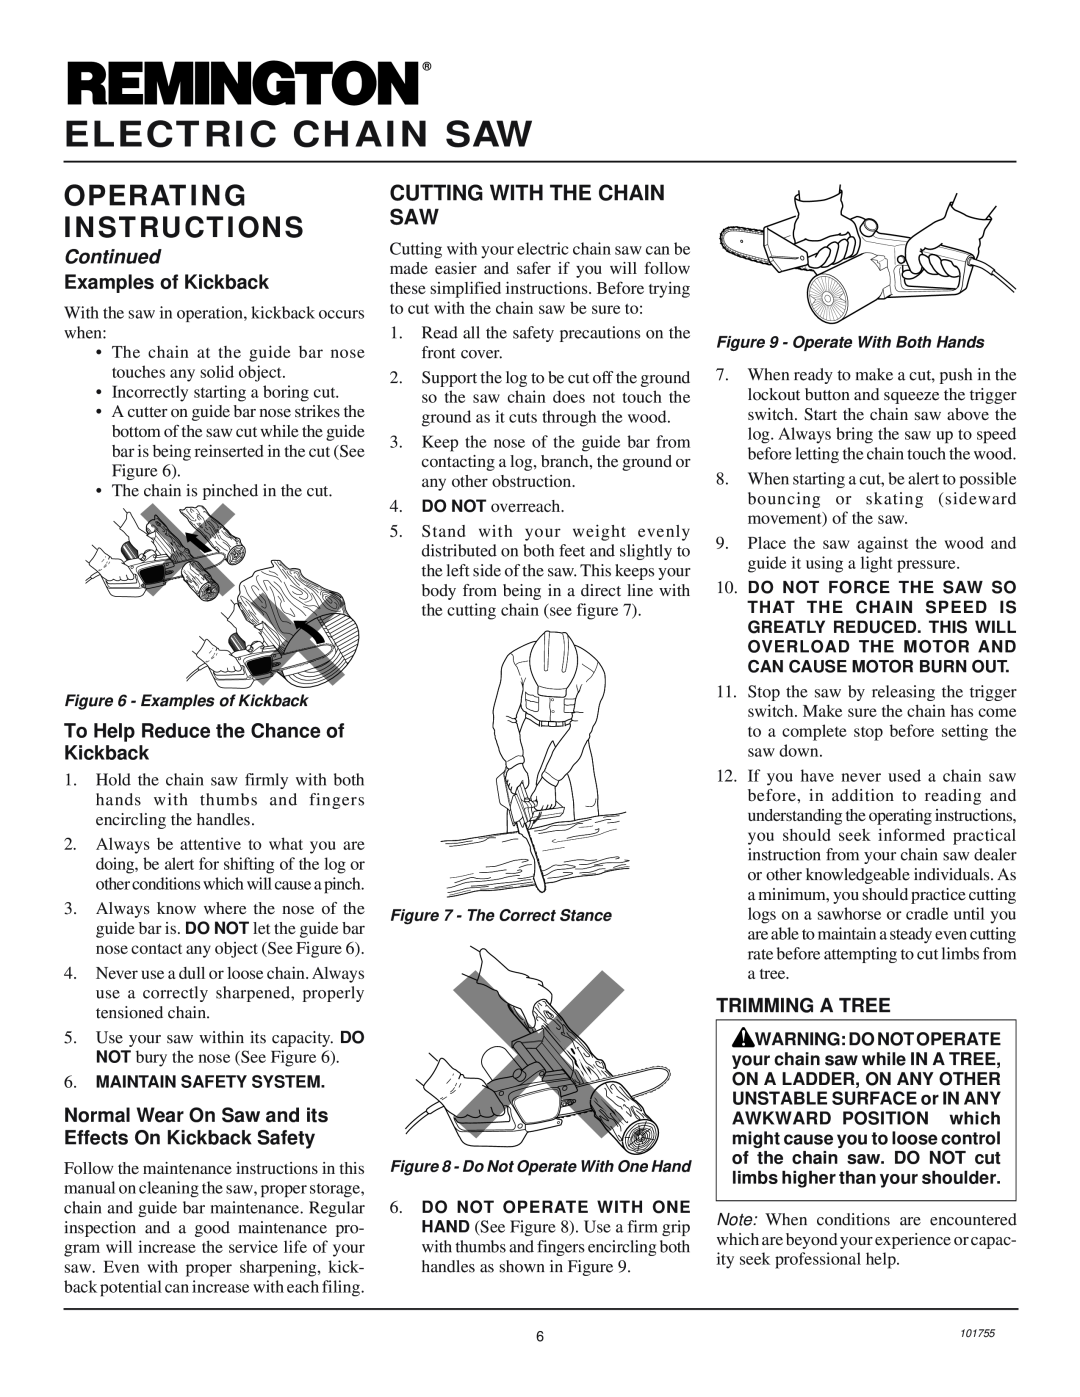 Remington Power Tools EL-3 owner manual Cutting With The Chain Saw, Continued, Examples of Kickback, Trimming A Tree 